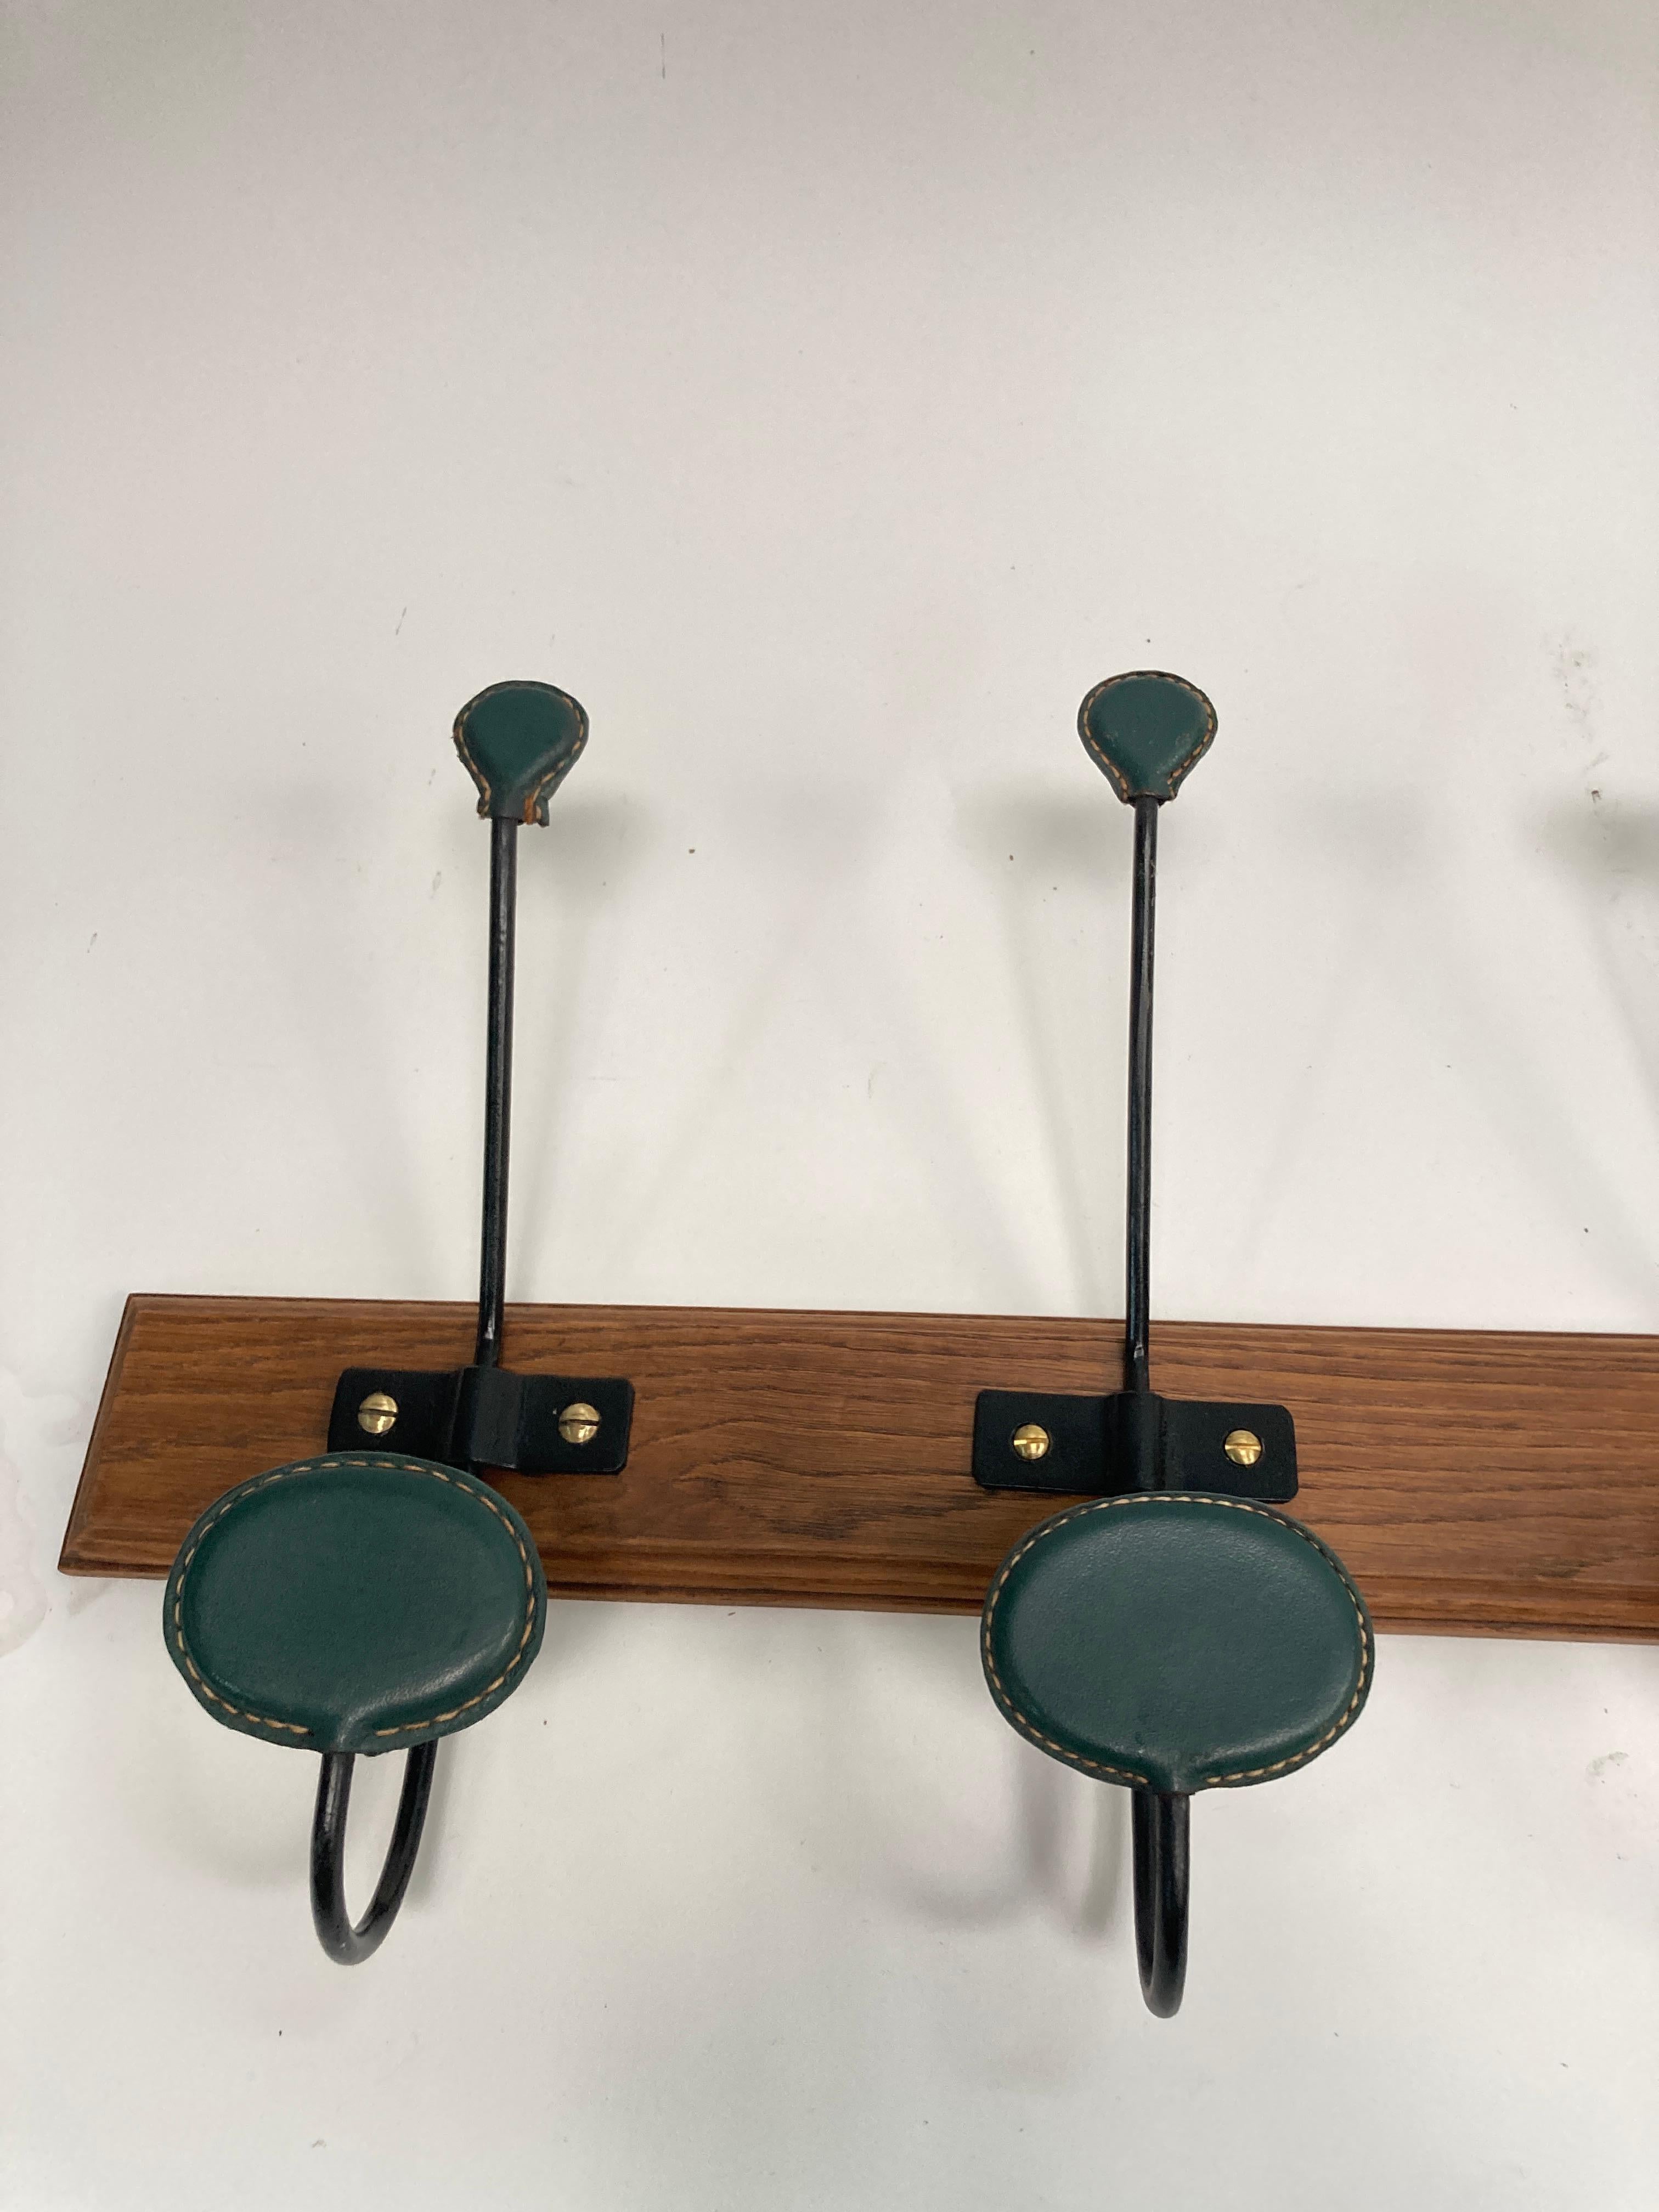 Rare large Stitched leather coat rack  by Jacques Adnet
Very rare long like this with 8 pieces
Great condition
Dark green leather